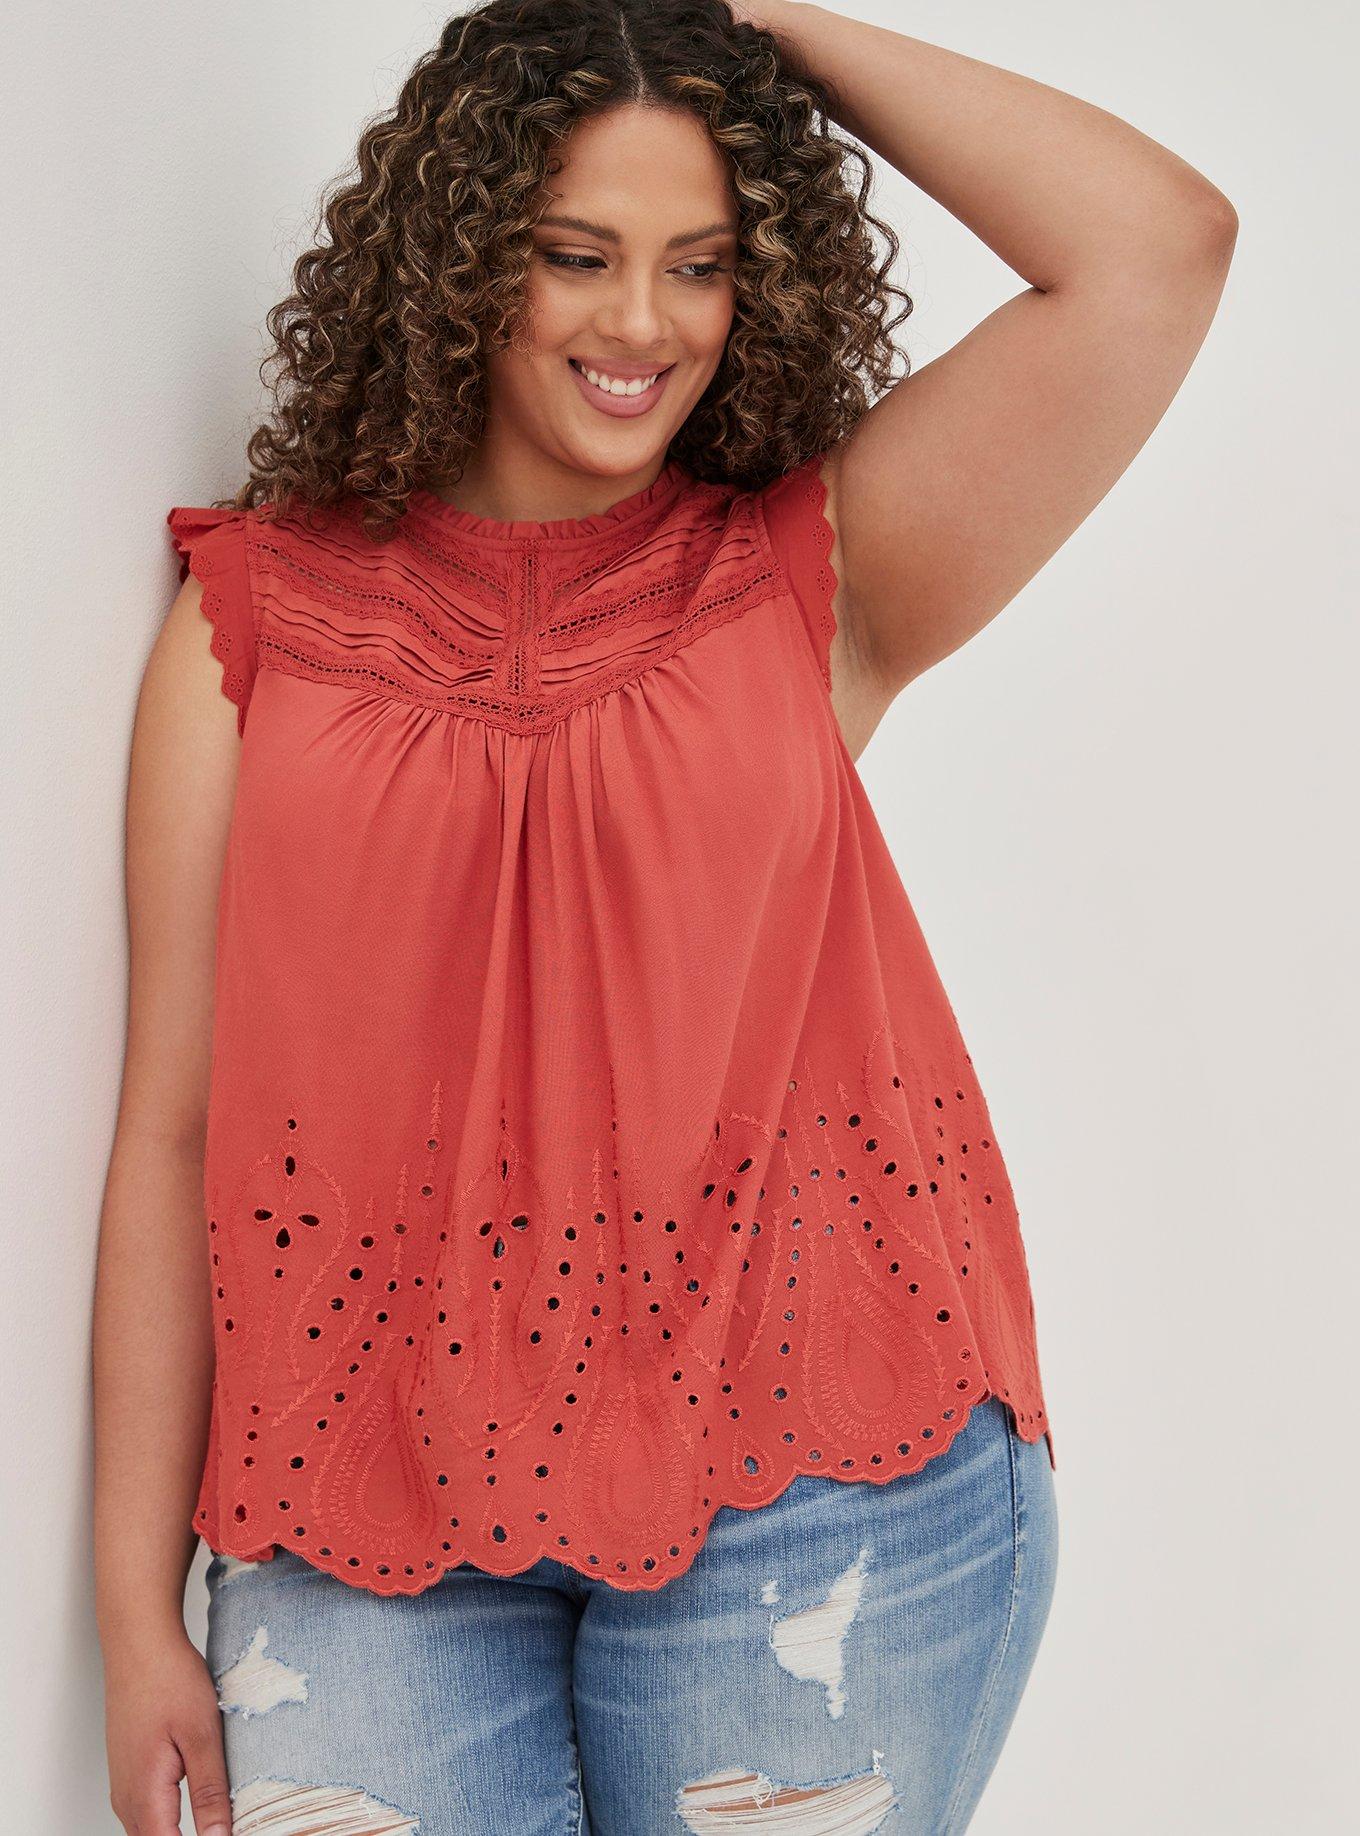 Torrid White Eyelet Fit & Flare Top, Size 3